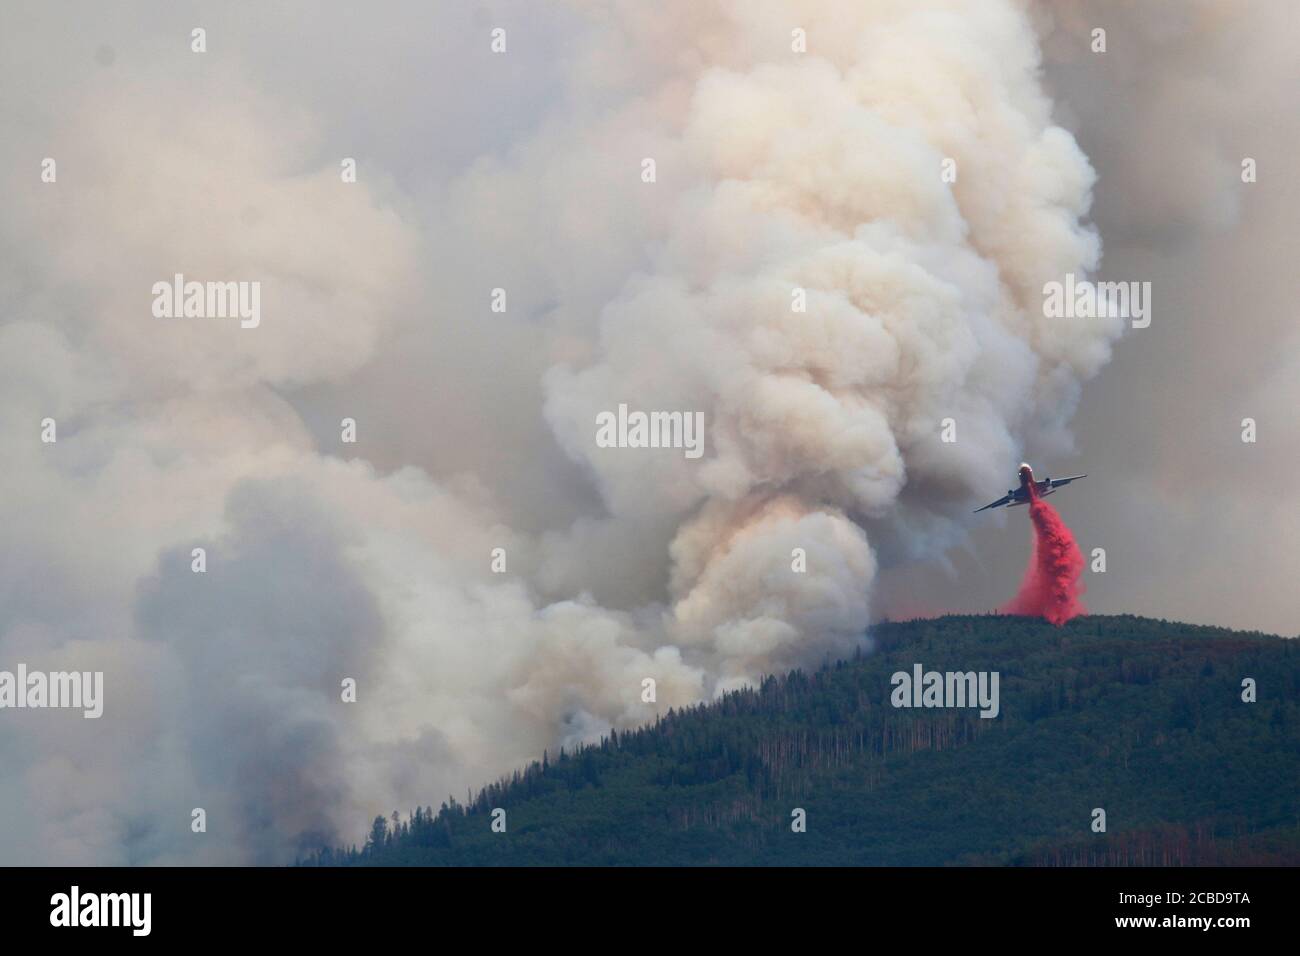 Glenwood Canyon, Colorado, USA. 12th August 2020. An air tanker drops fire retardant in front of the  Grizzly Creek Fire. Credit: Christopher Mullen Stock Photo